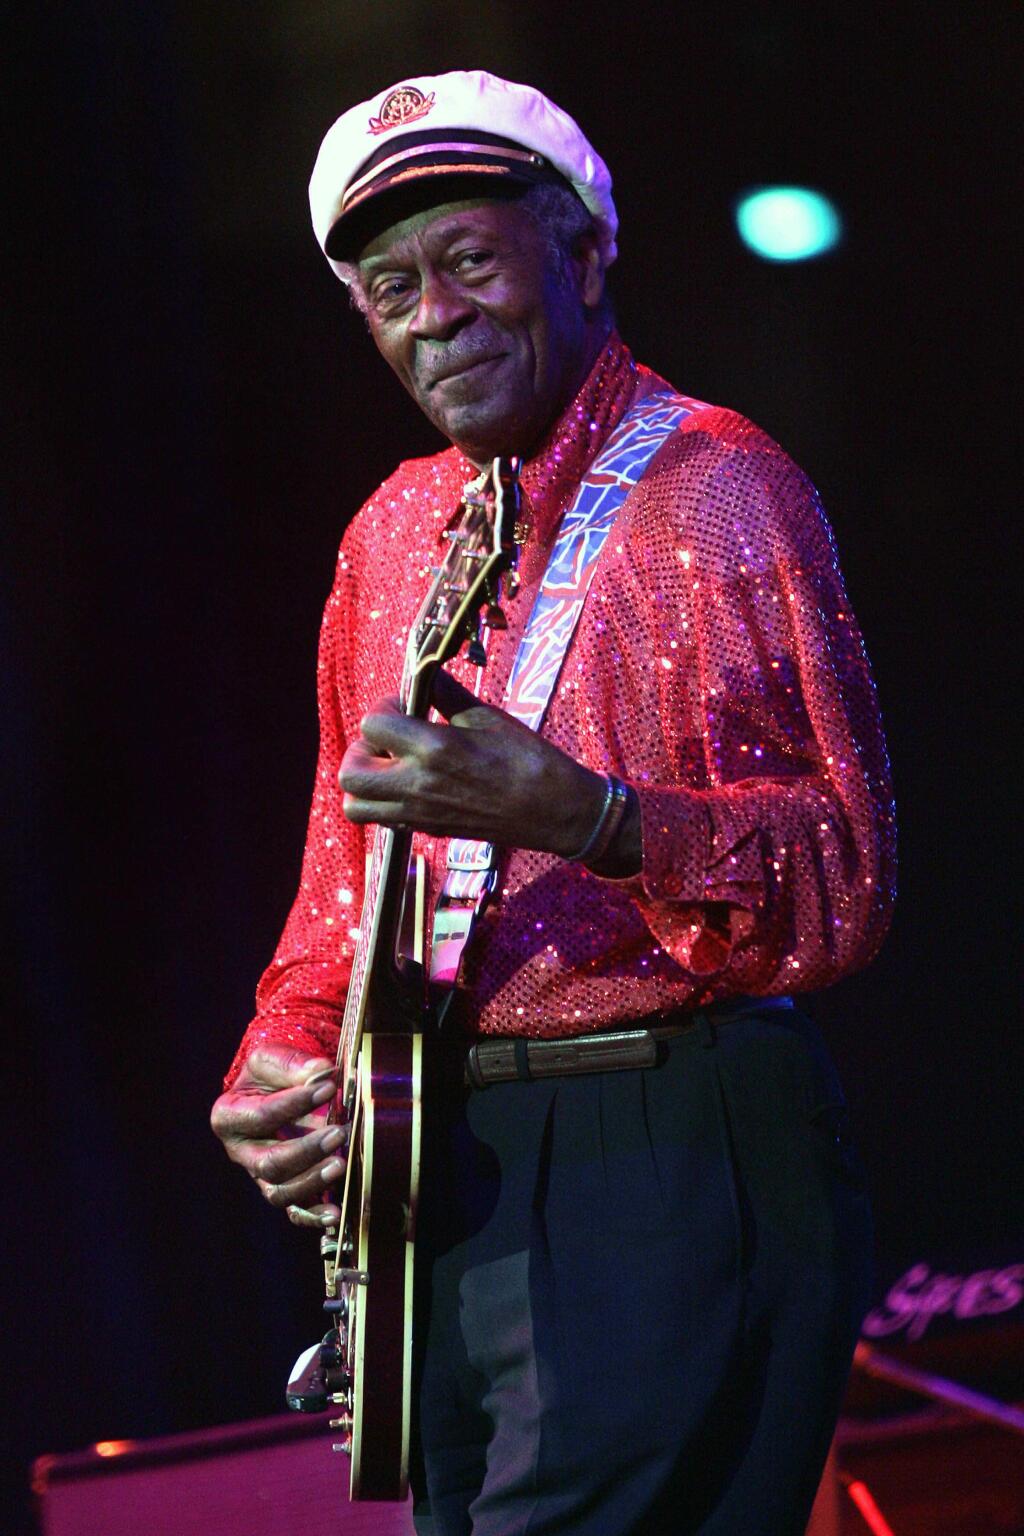 FILE - In this Saturday, May 30, 2009 file photo, Chuck Berry performs at The Domino Effect, a tribute concert to New Orleans rock and roll musician Fats Domino, at the New Orleans Arena in New Orleans. On Saturday, March 18, 2017, police in Missouri said Berry has died at the age of 90. (AP Photo/Patrick Semansky)